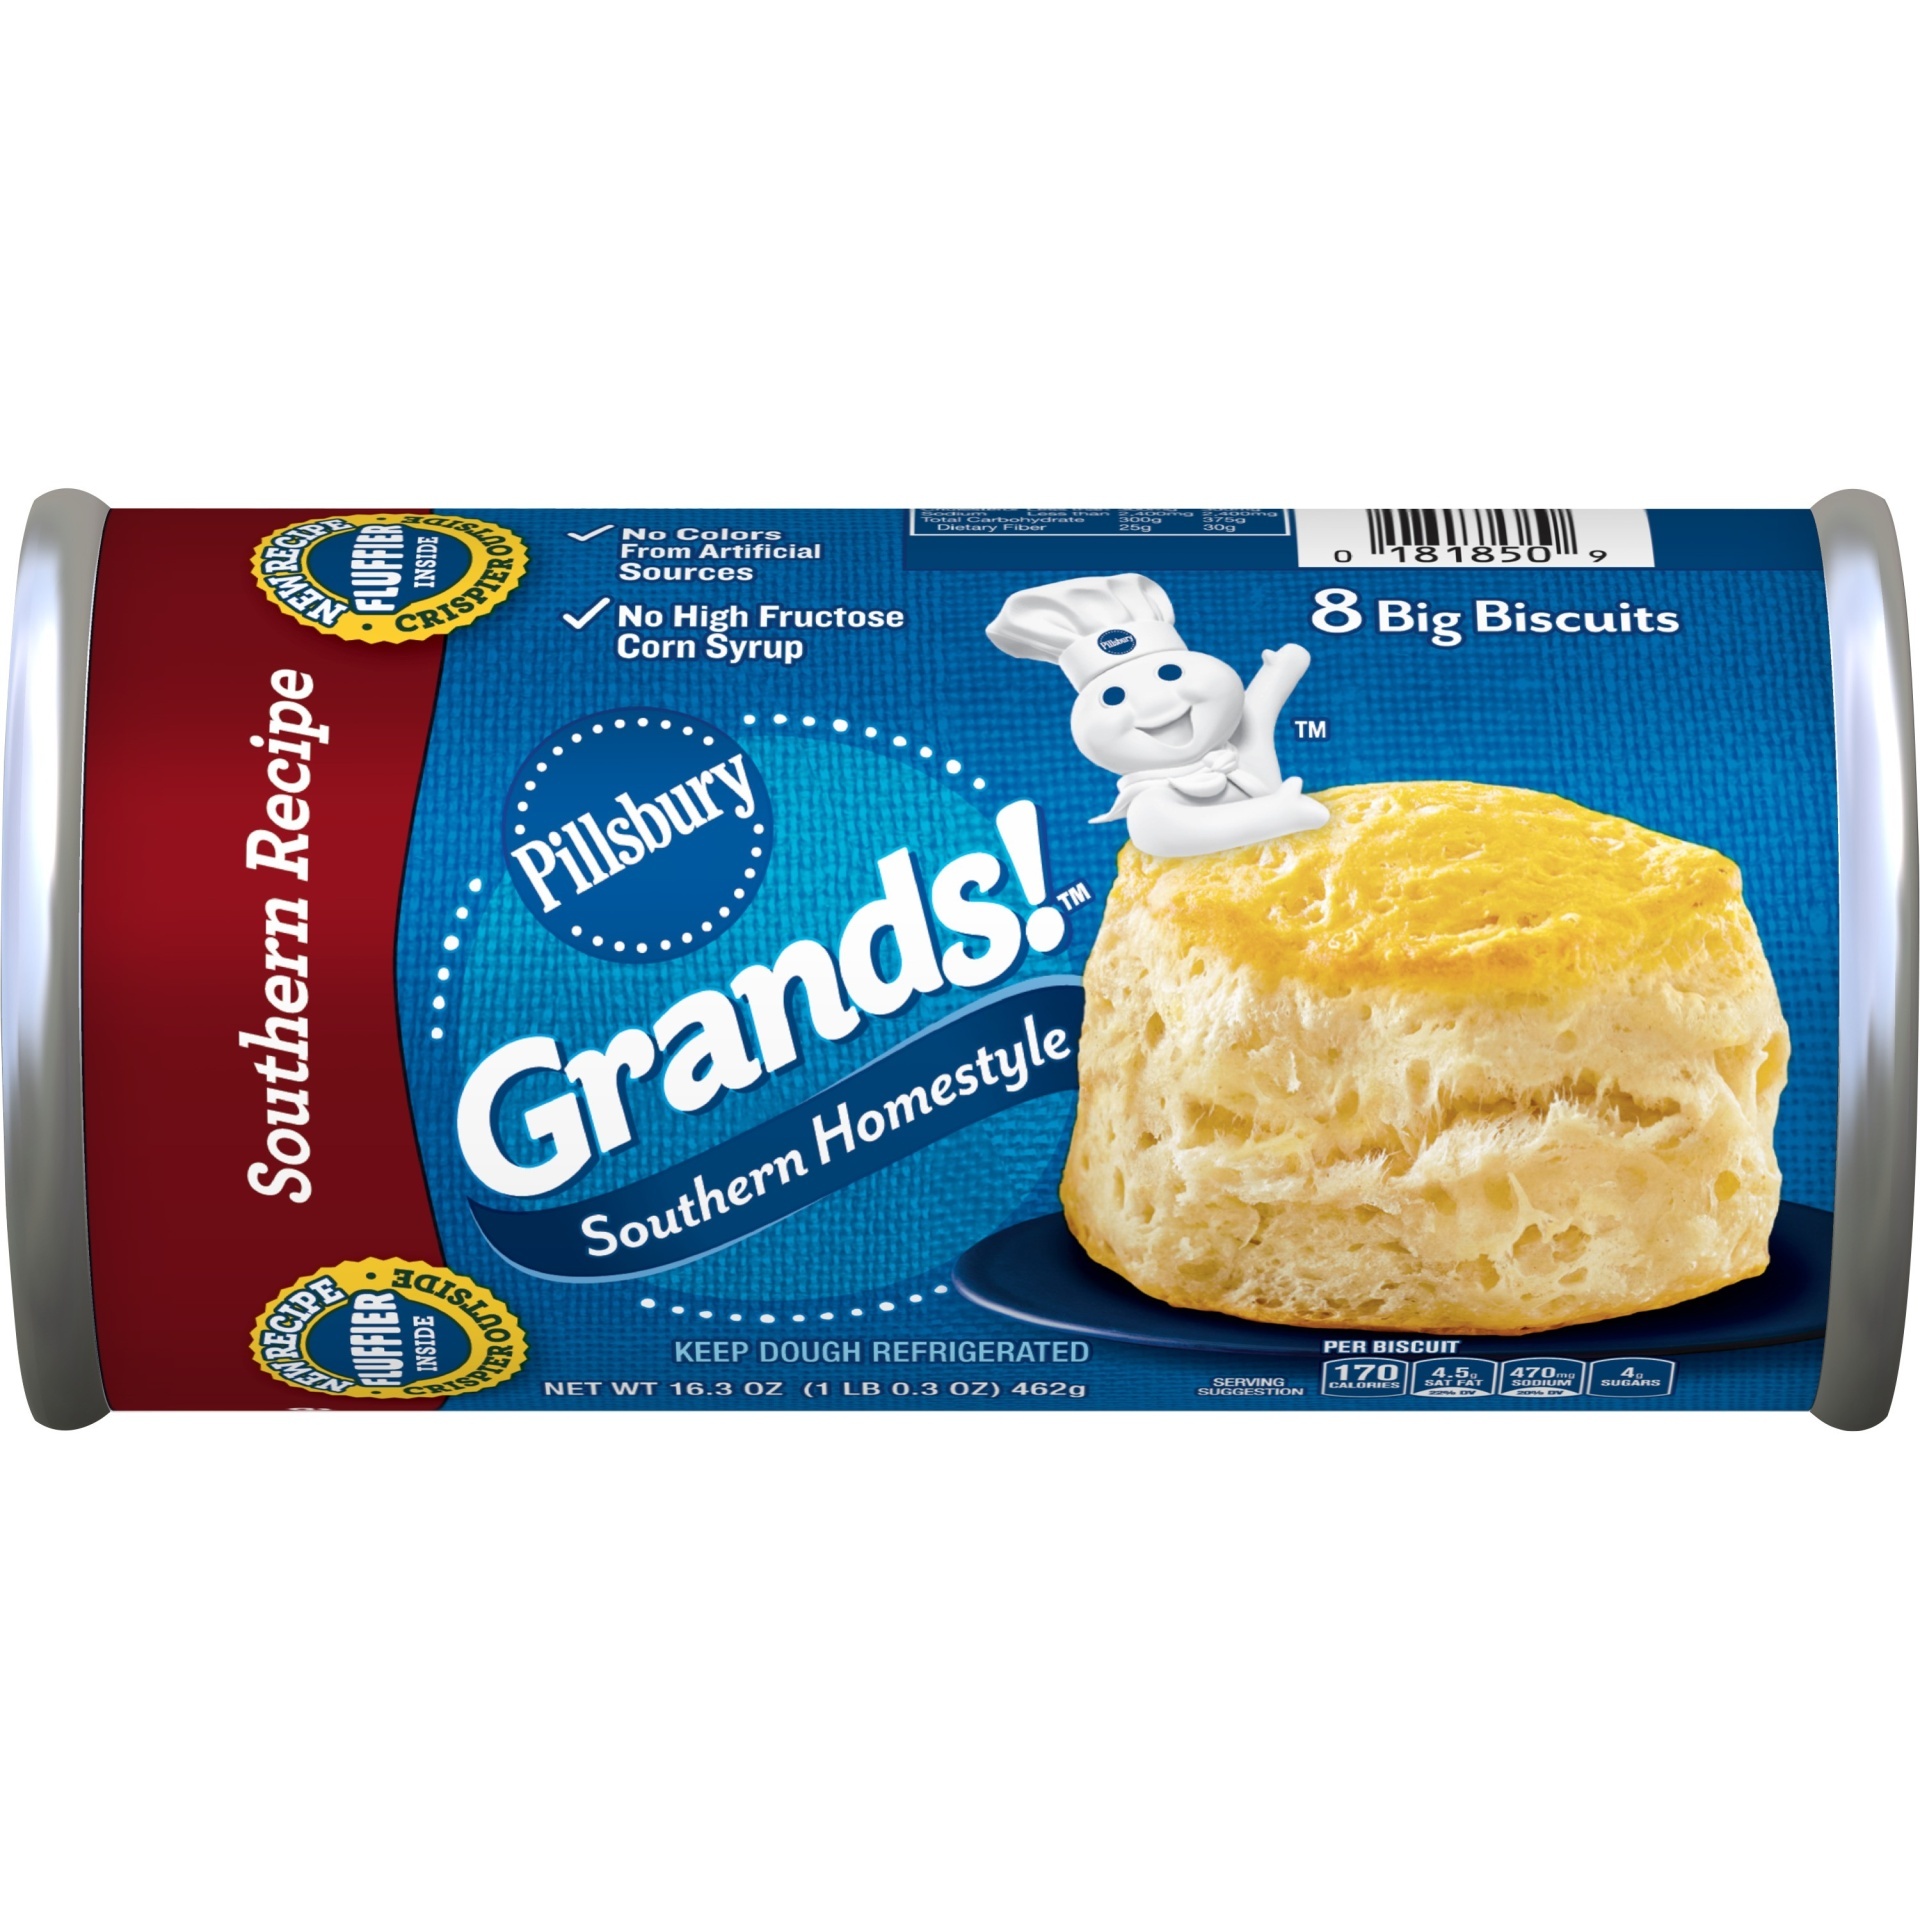 slide 1 of 1, Pillsbury Grands Southern Homestyle Biscuits, 8 ct; 16.3 oz